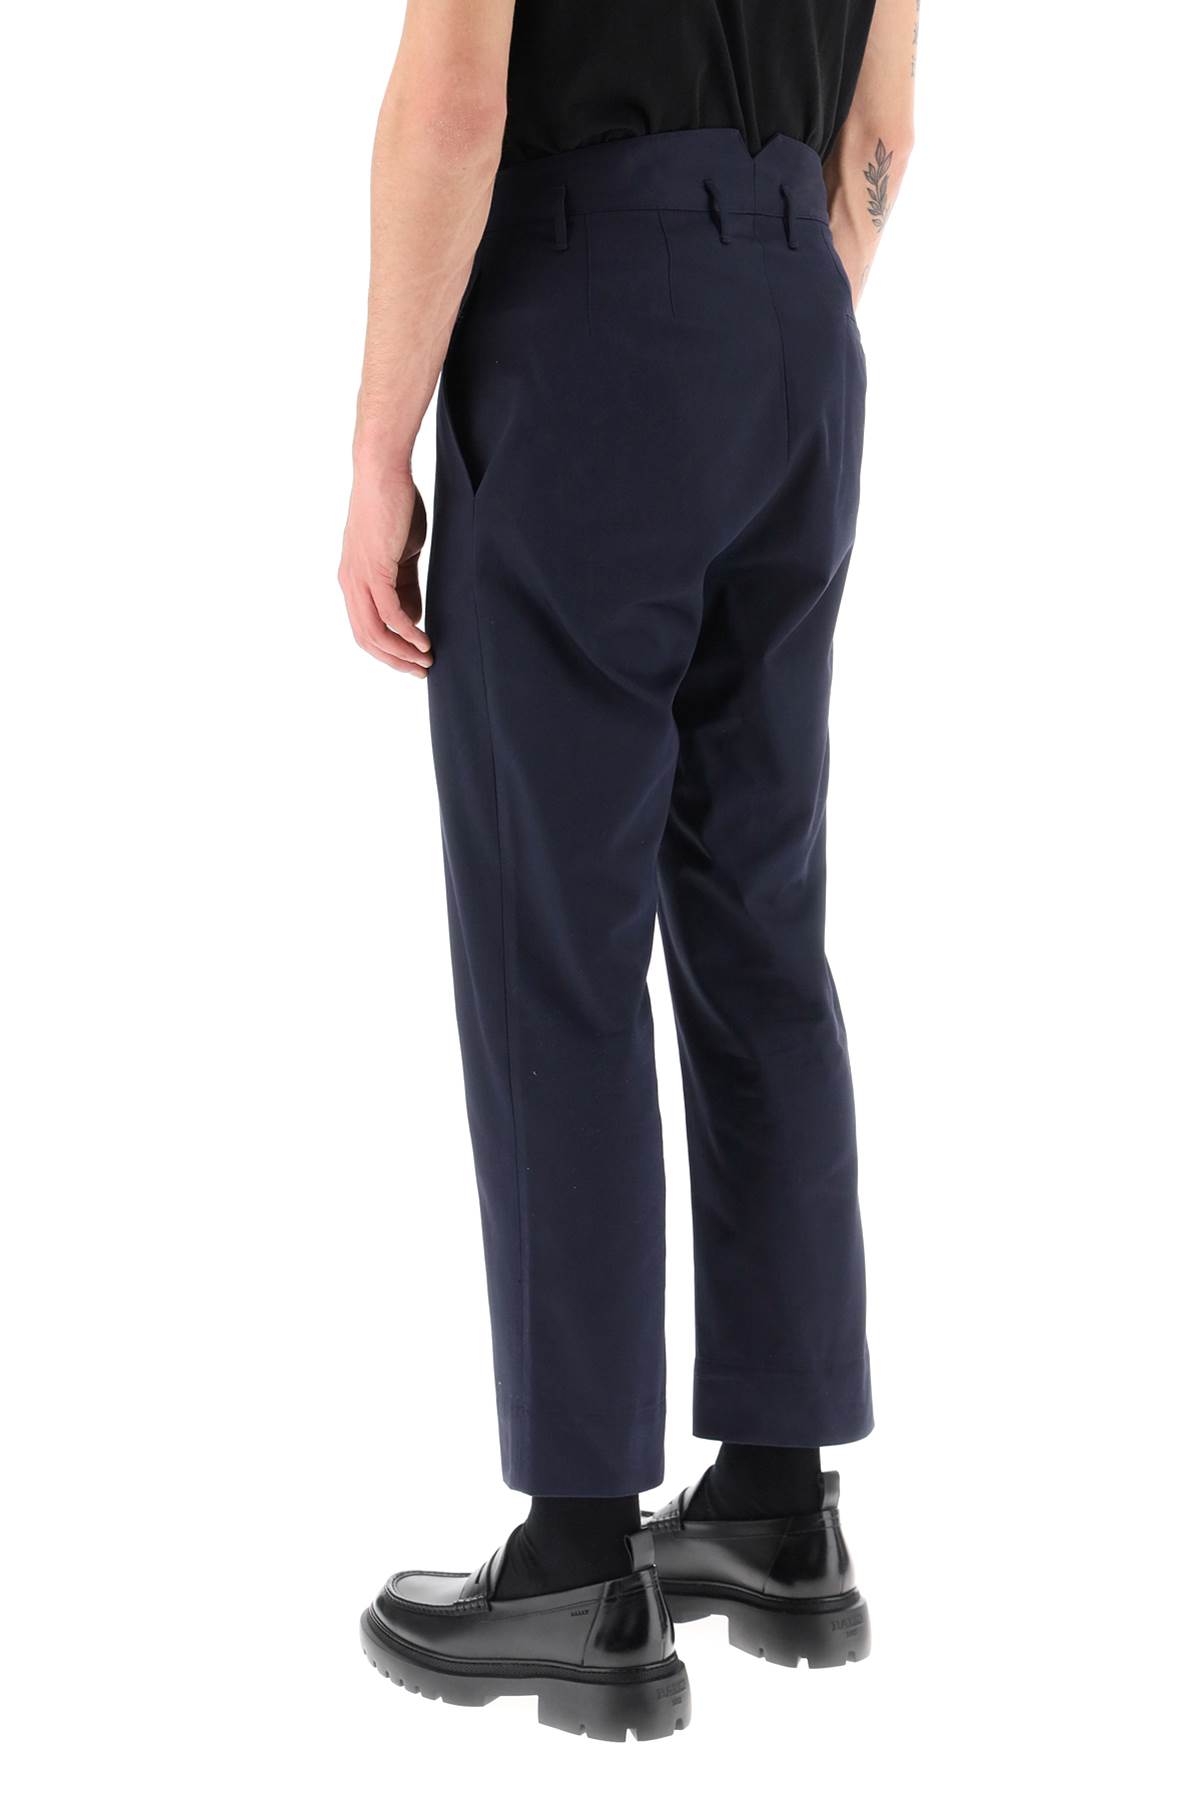 Shop Vivienne Westwood Cropped Cruise Pants Featuring Embroidered Heart-shaped Logo In Navy (blue)